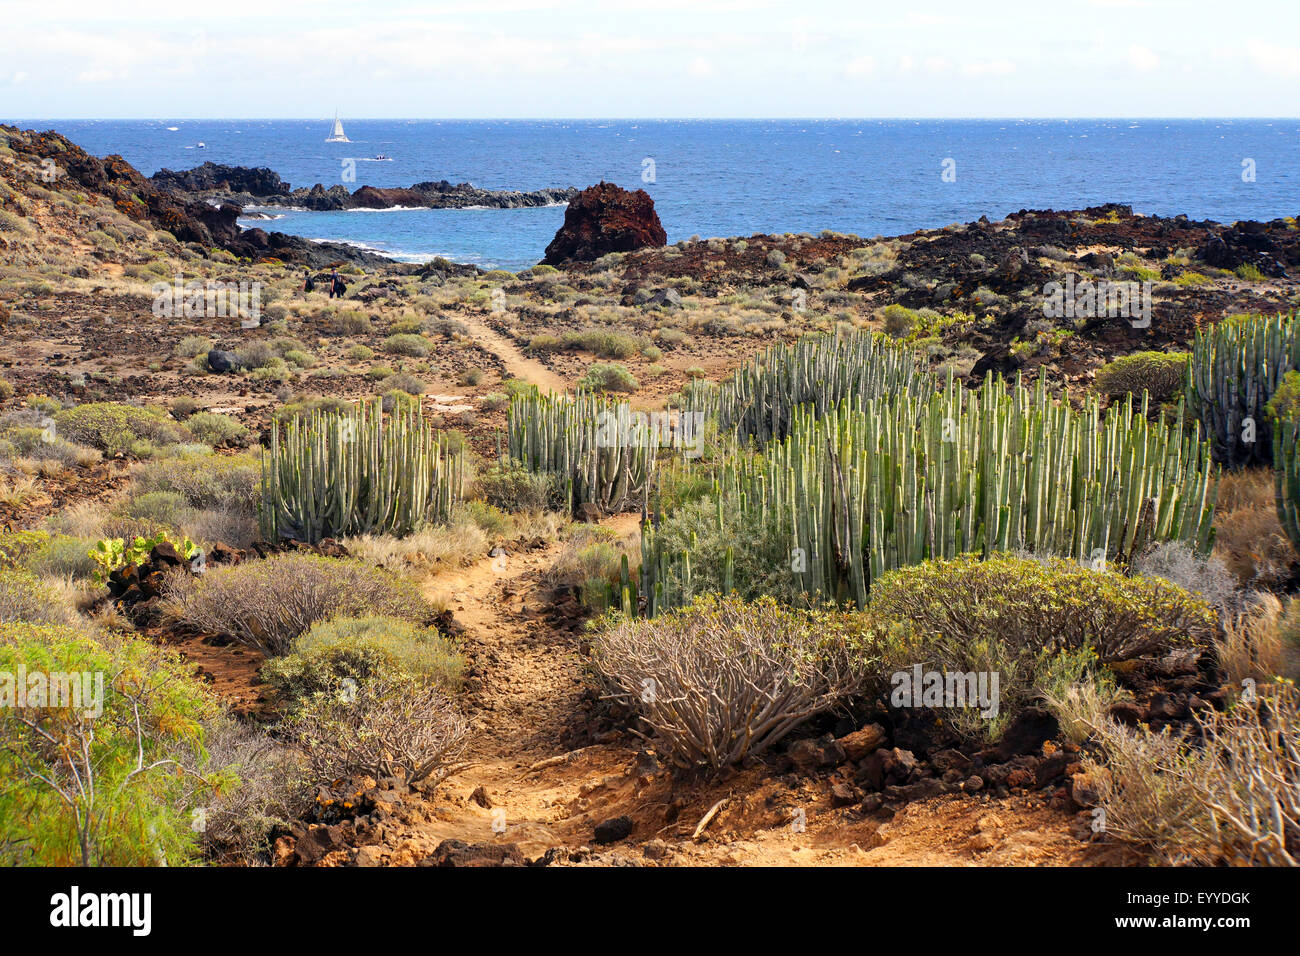 typical vegation in the South of Tenerife, Canary Islands, Tenerife, Las Galletas Stock Photo